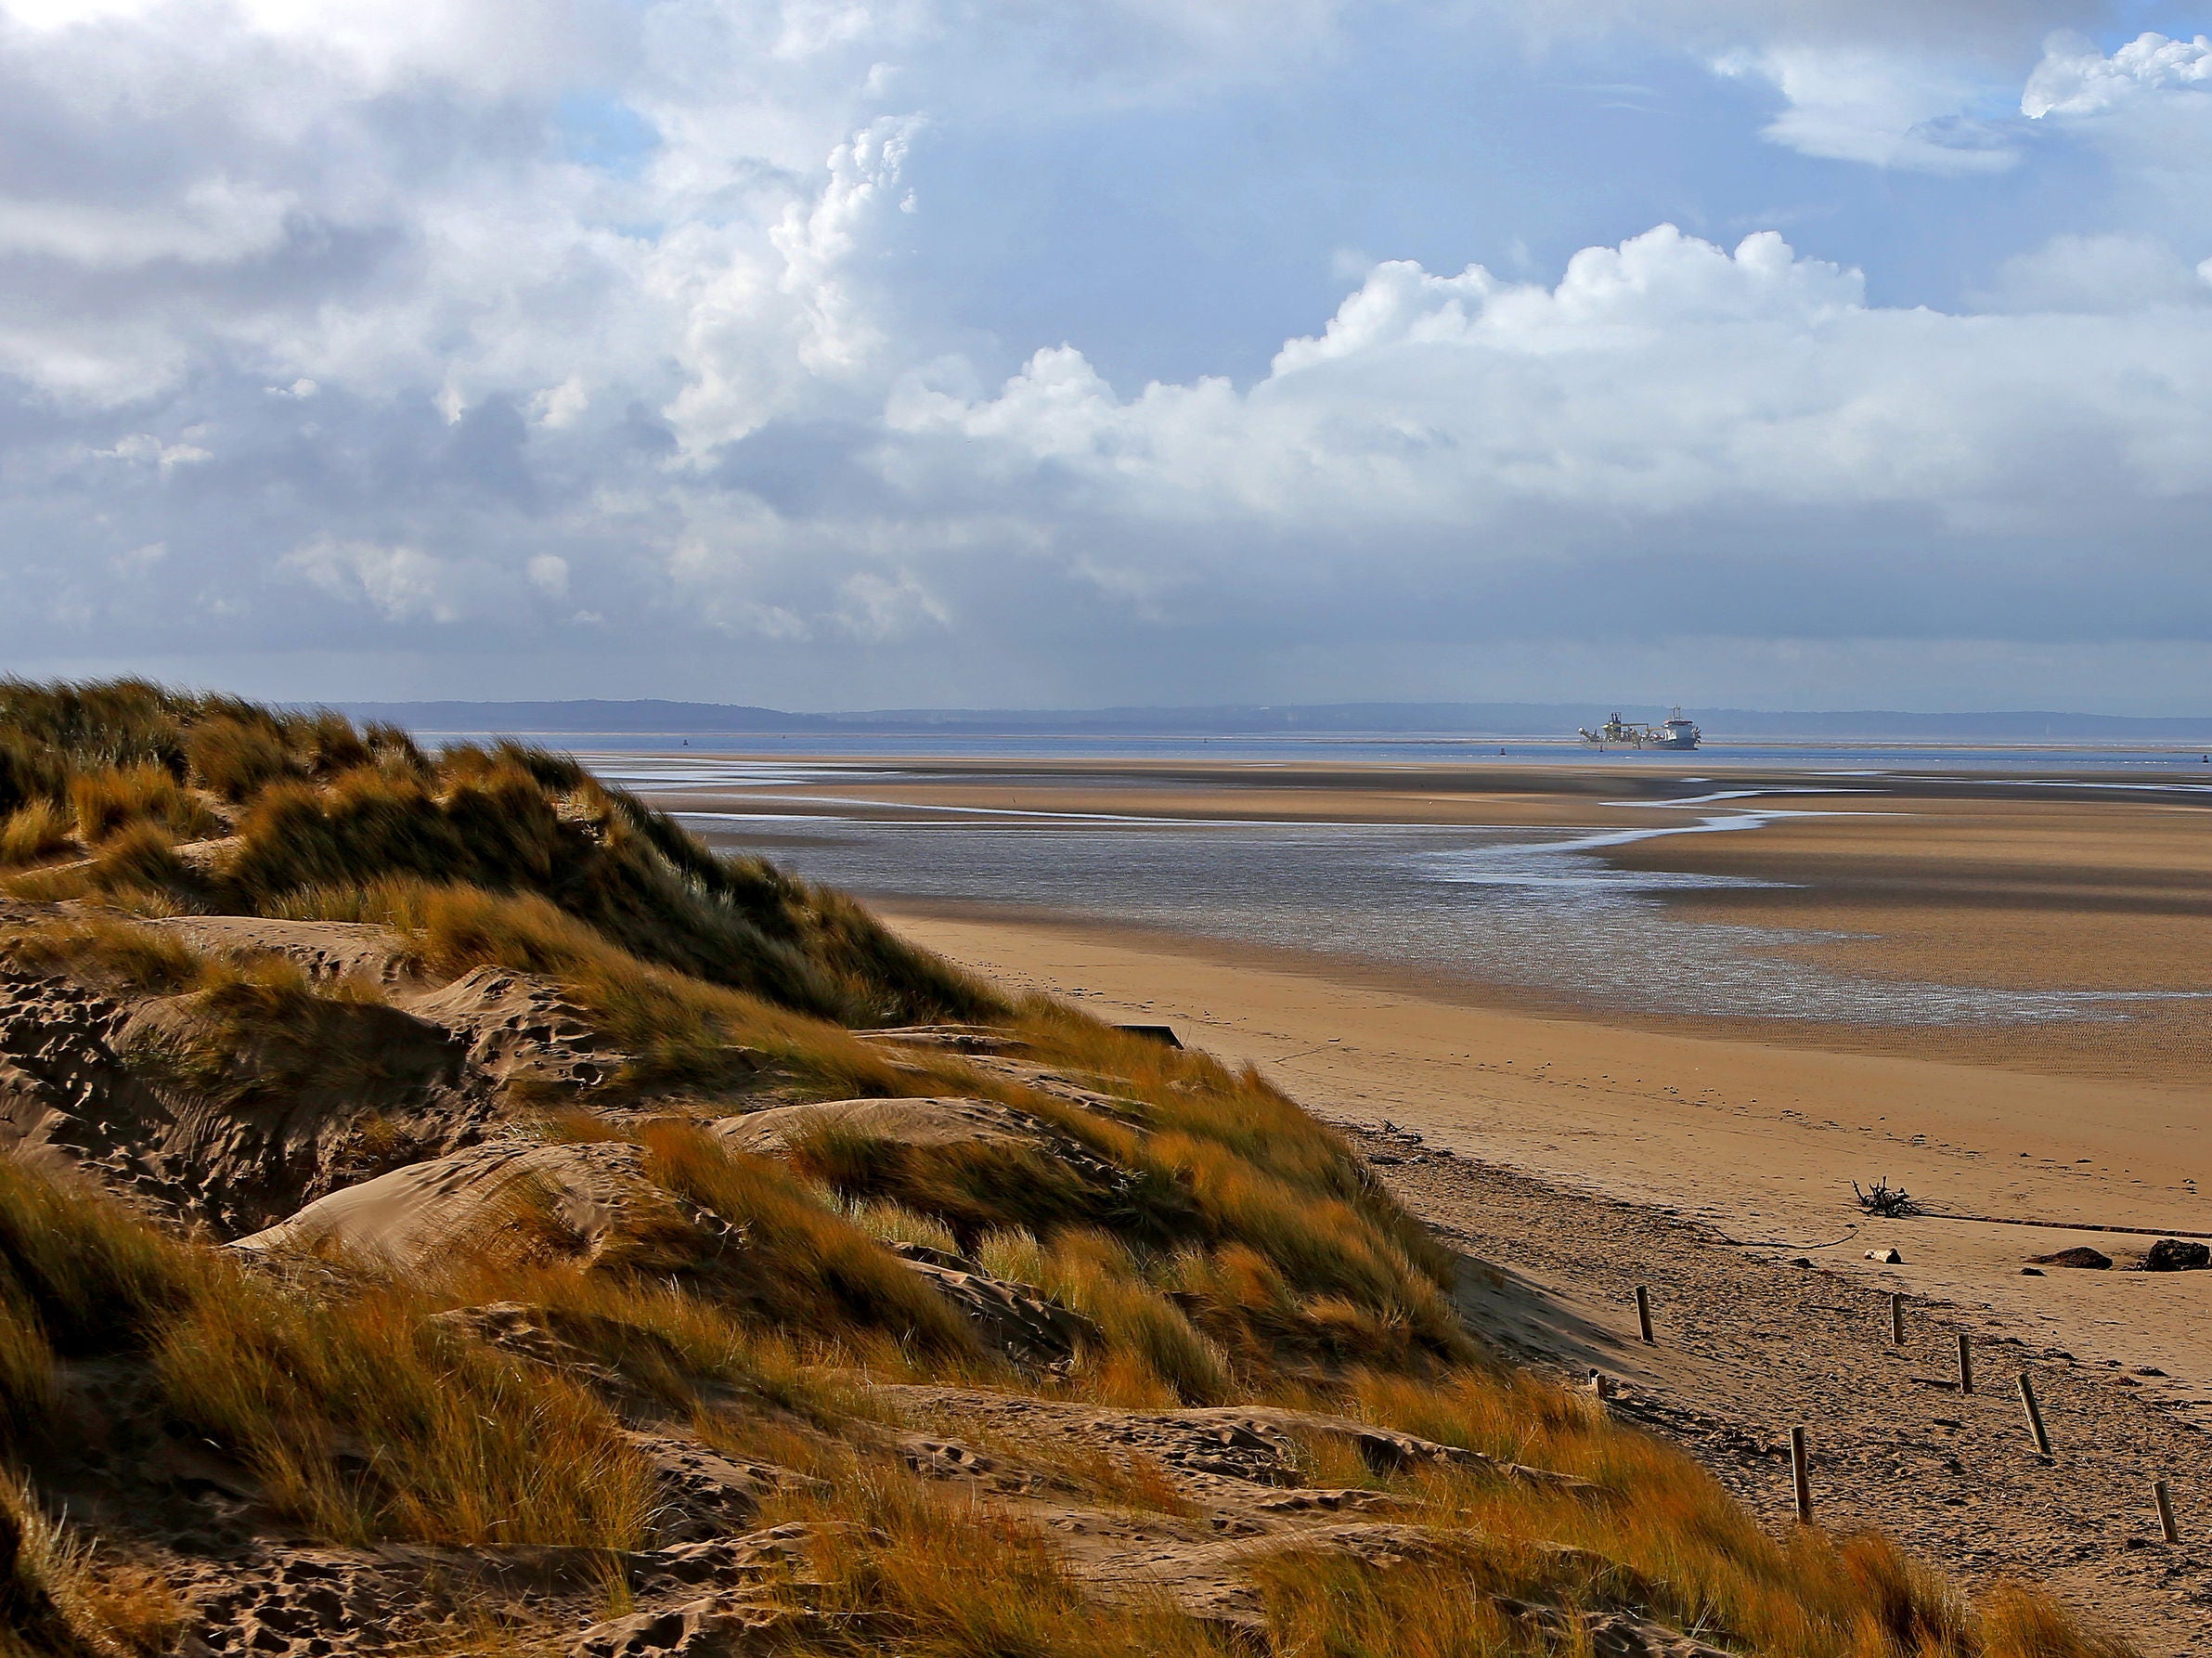 Around 100 people were found at the party on Formby beach